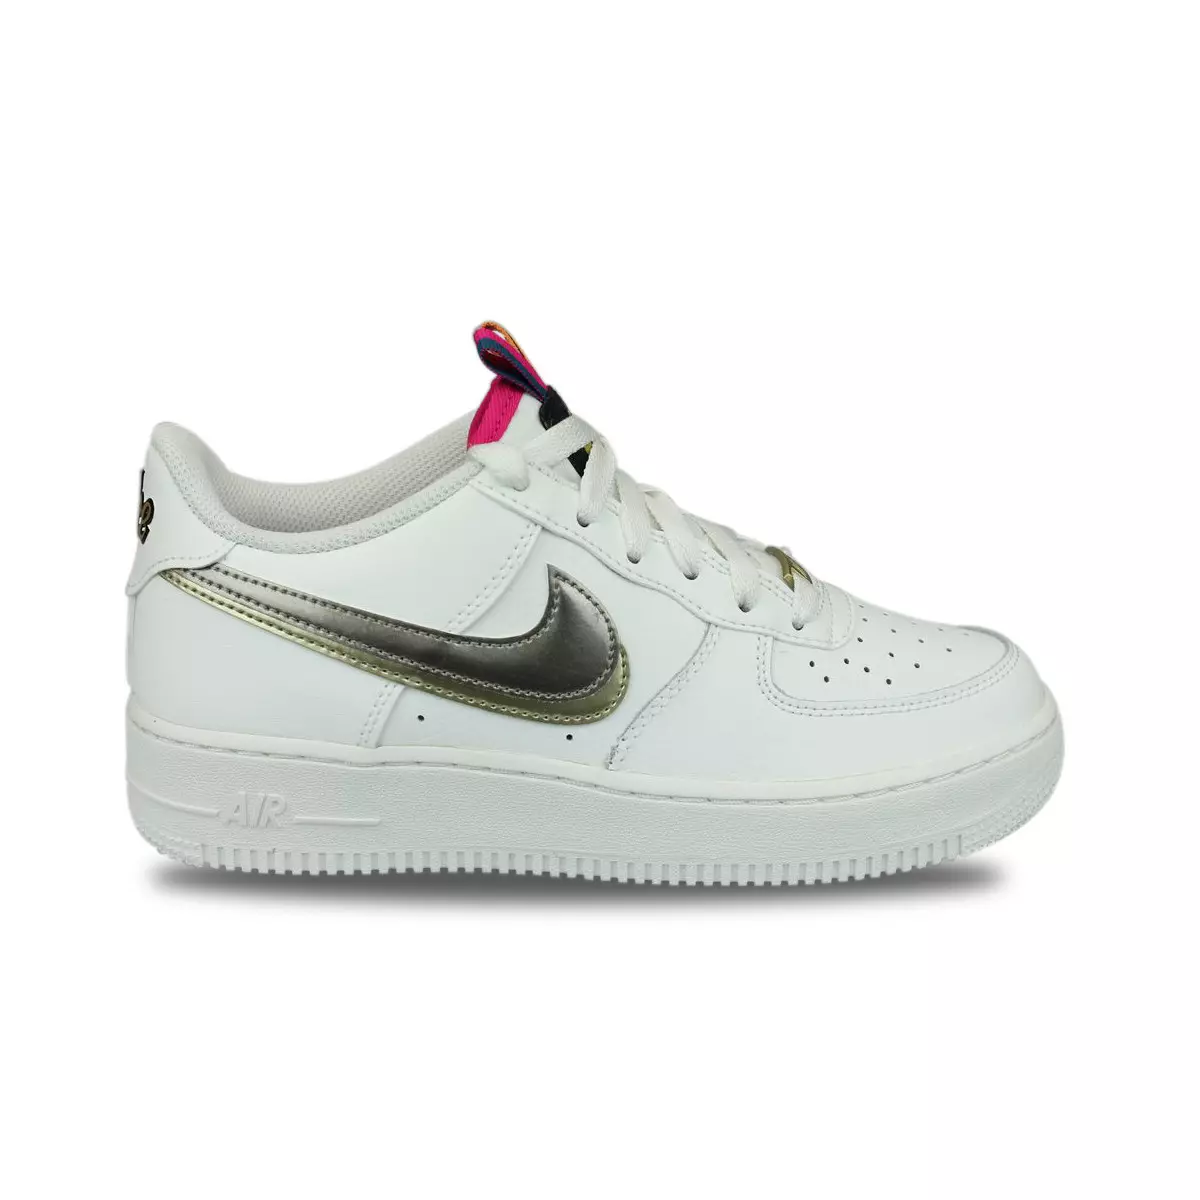 Nike Air Force 1 LV8 Double Swoosh Silver Gold Blanc